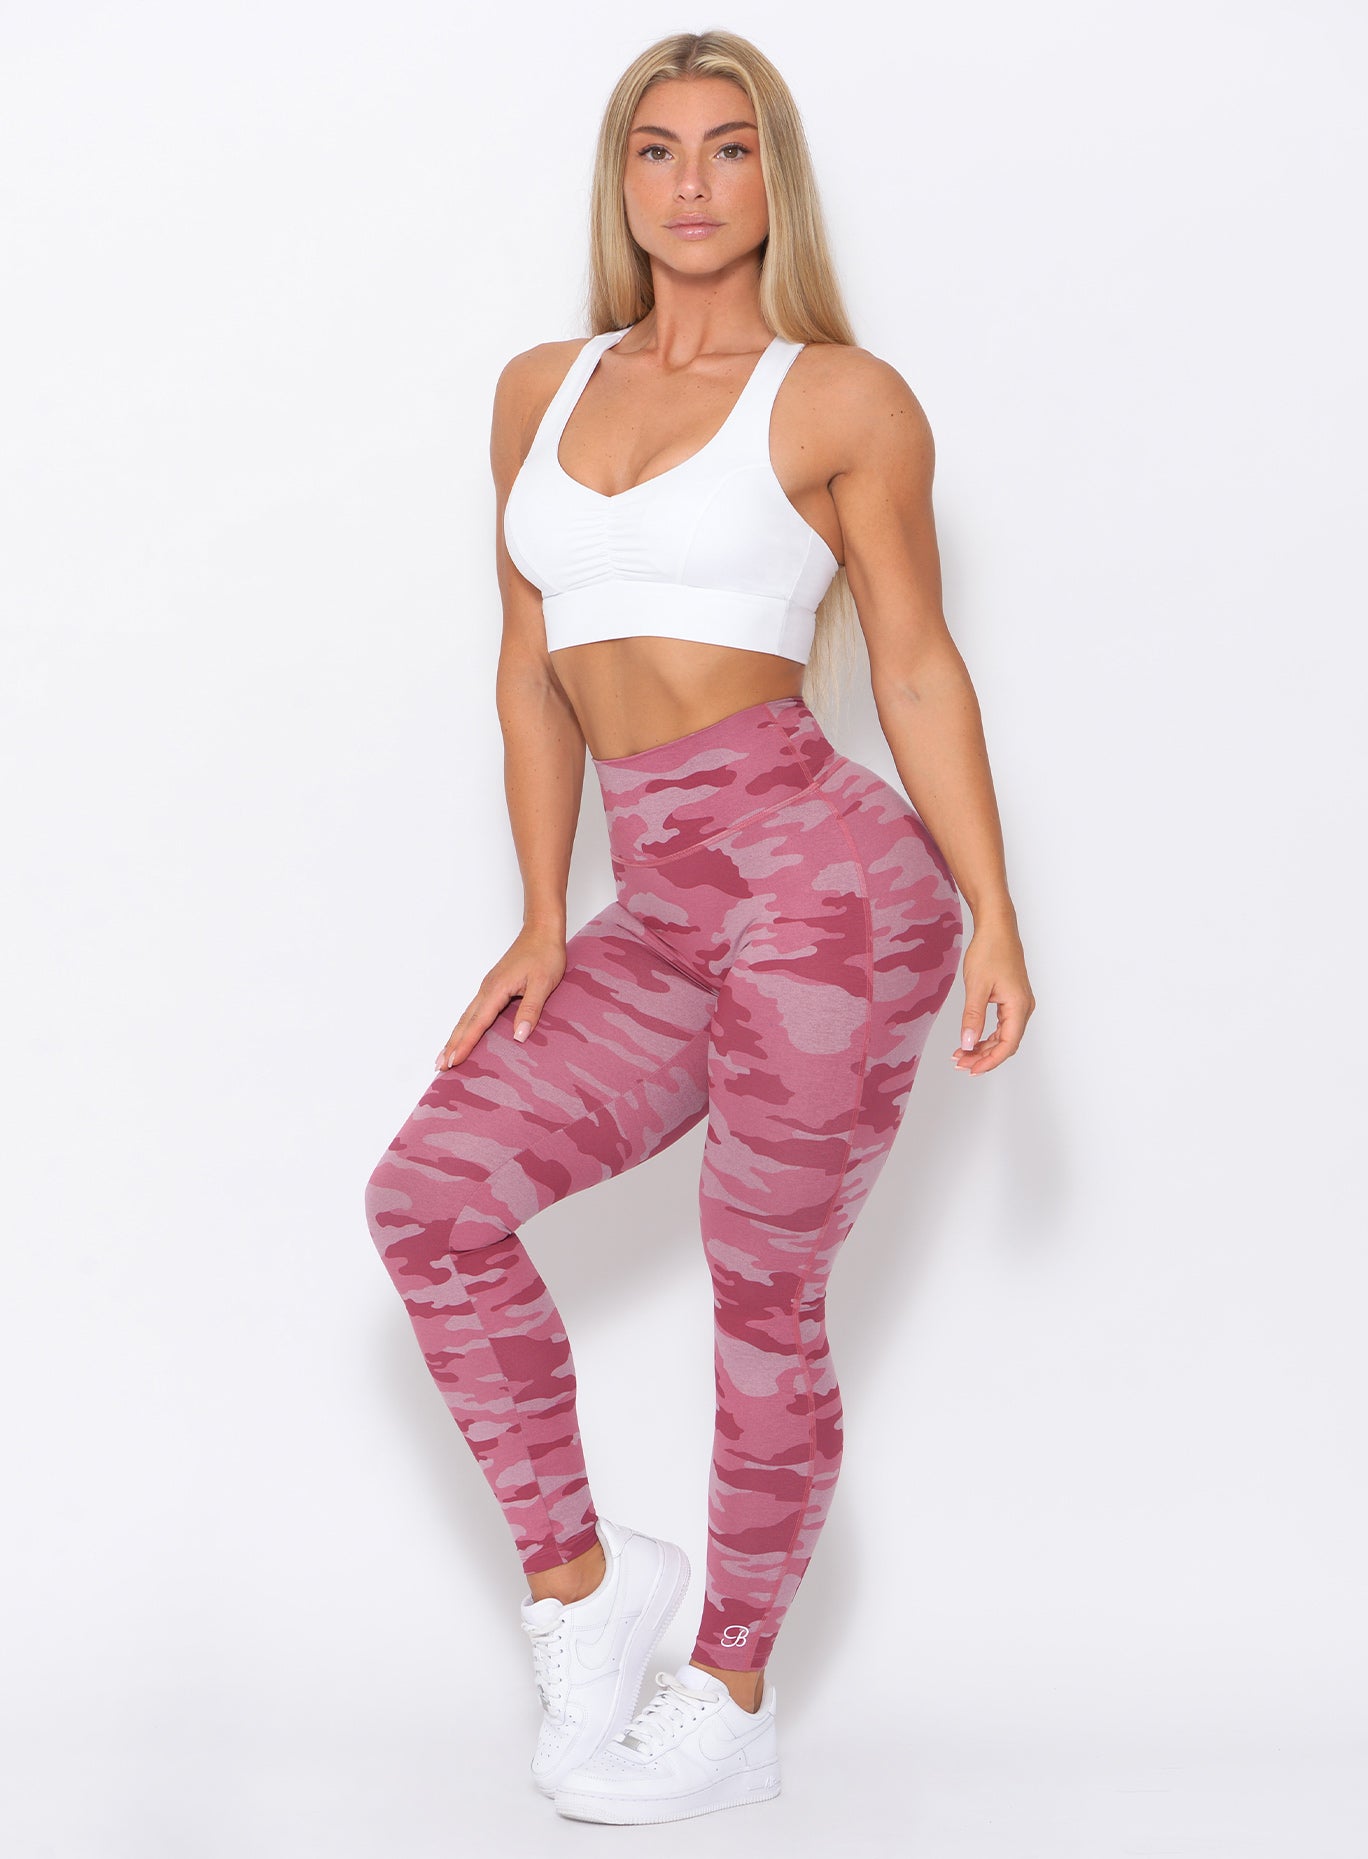 Three quarters view of the model wearing our fit camo leggings in hibiscus camo color and a white bra